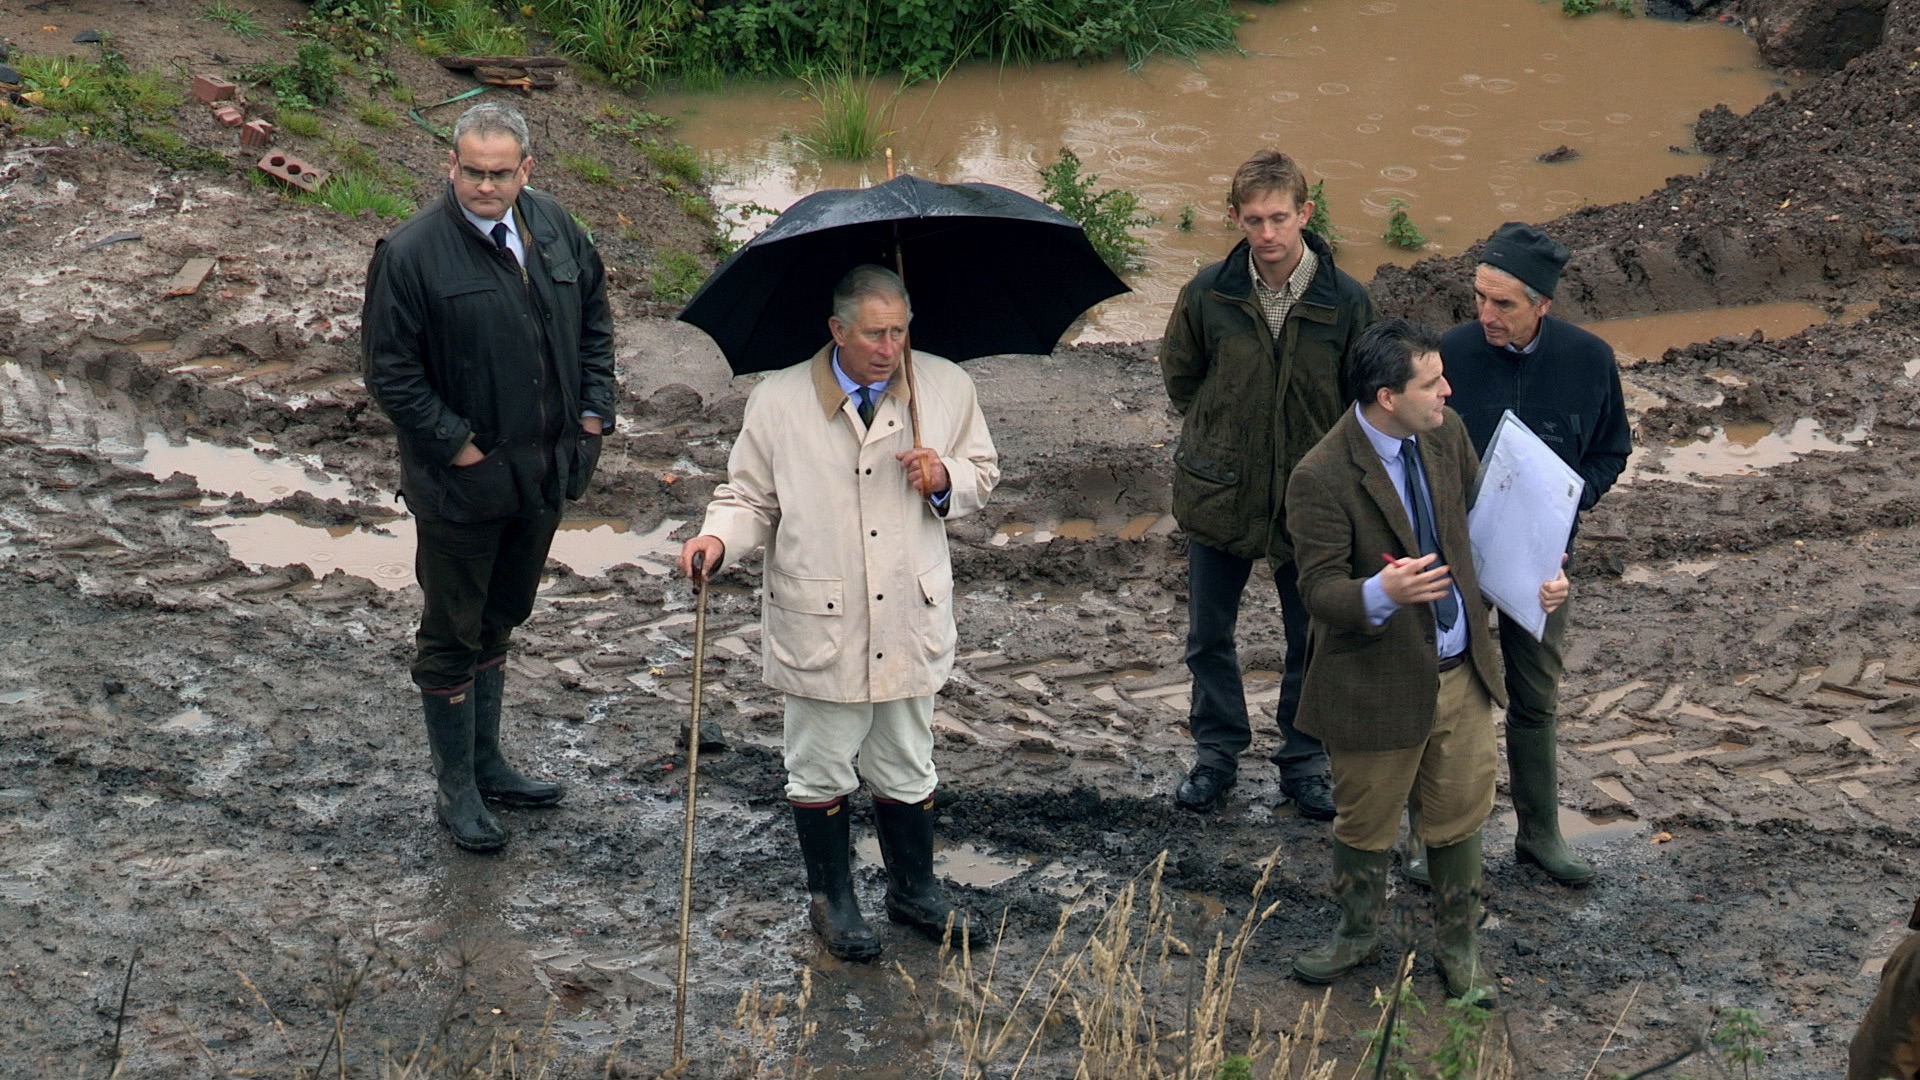 King Charles III in a mac and rubber boots and carrying an umbrella and cane walks through the mud with his restoration team.